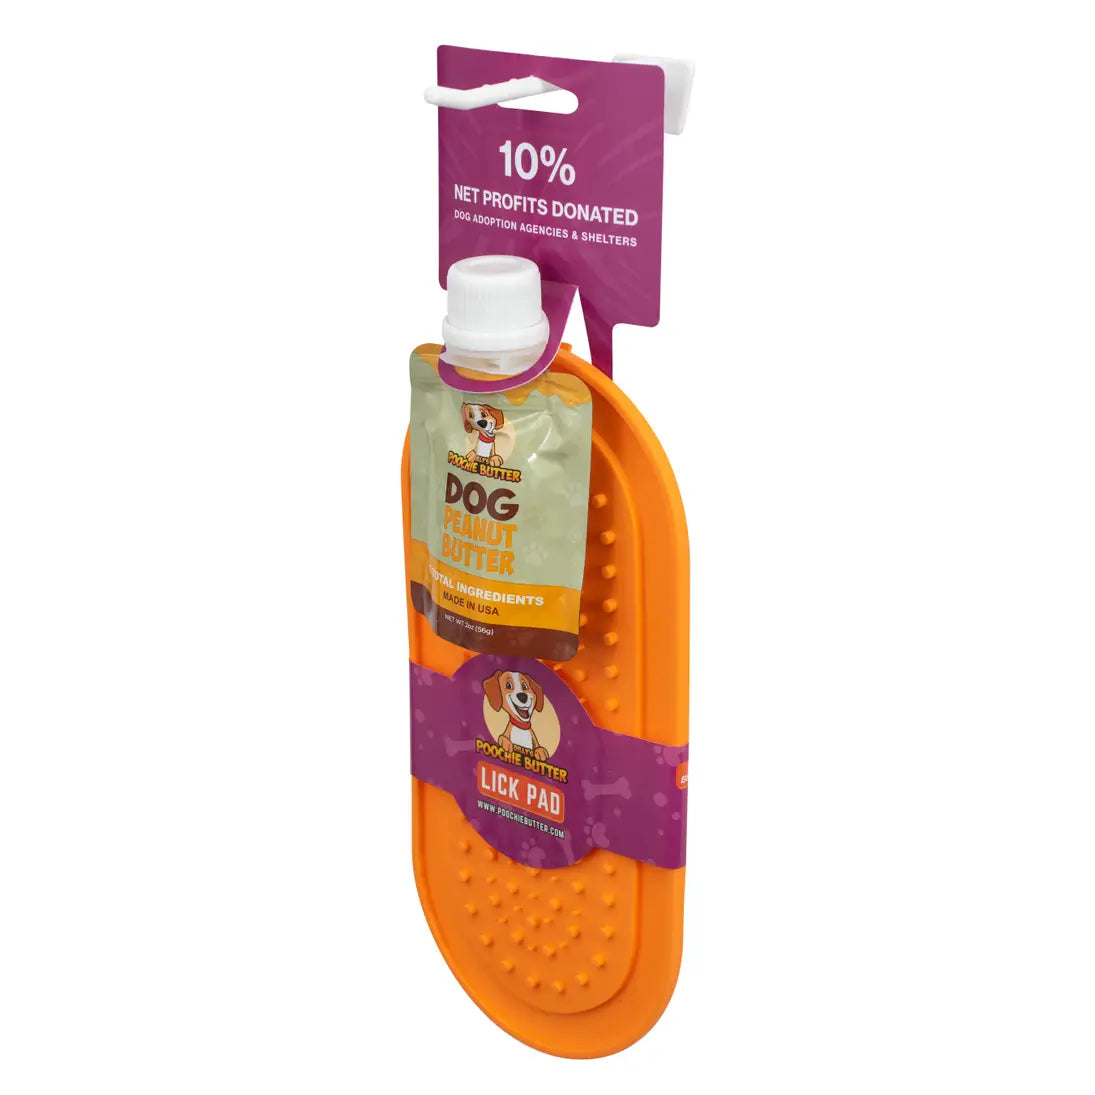 Poochie Butter 2oz Squeeze Pack + Lick Pad Oval